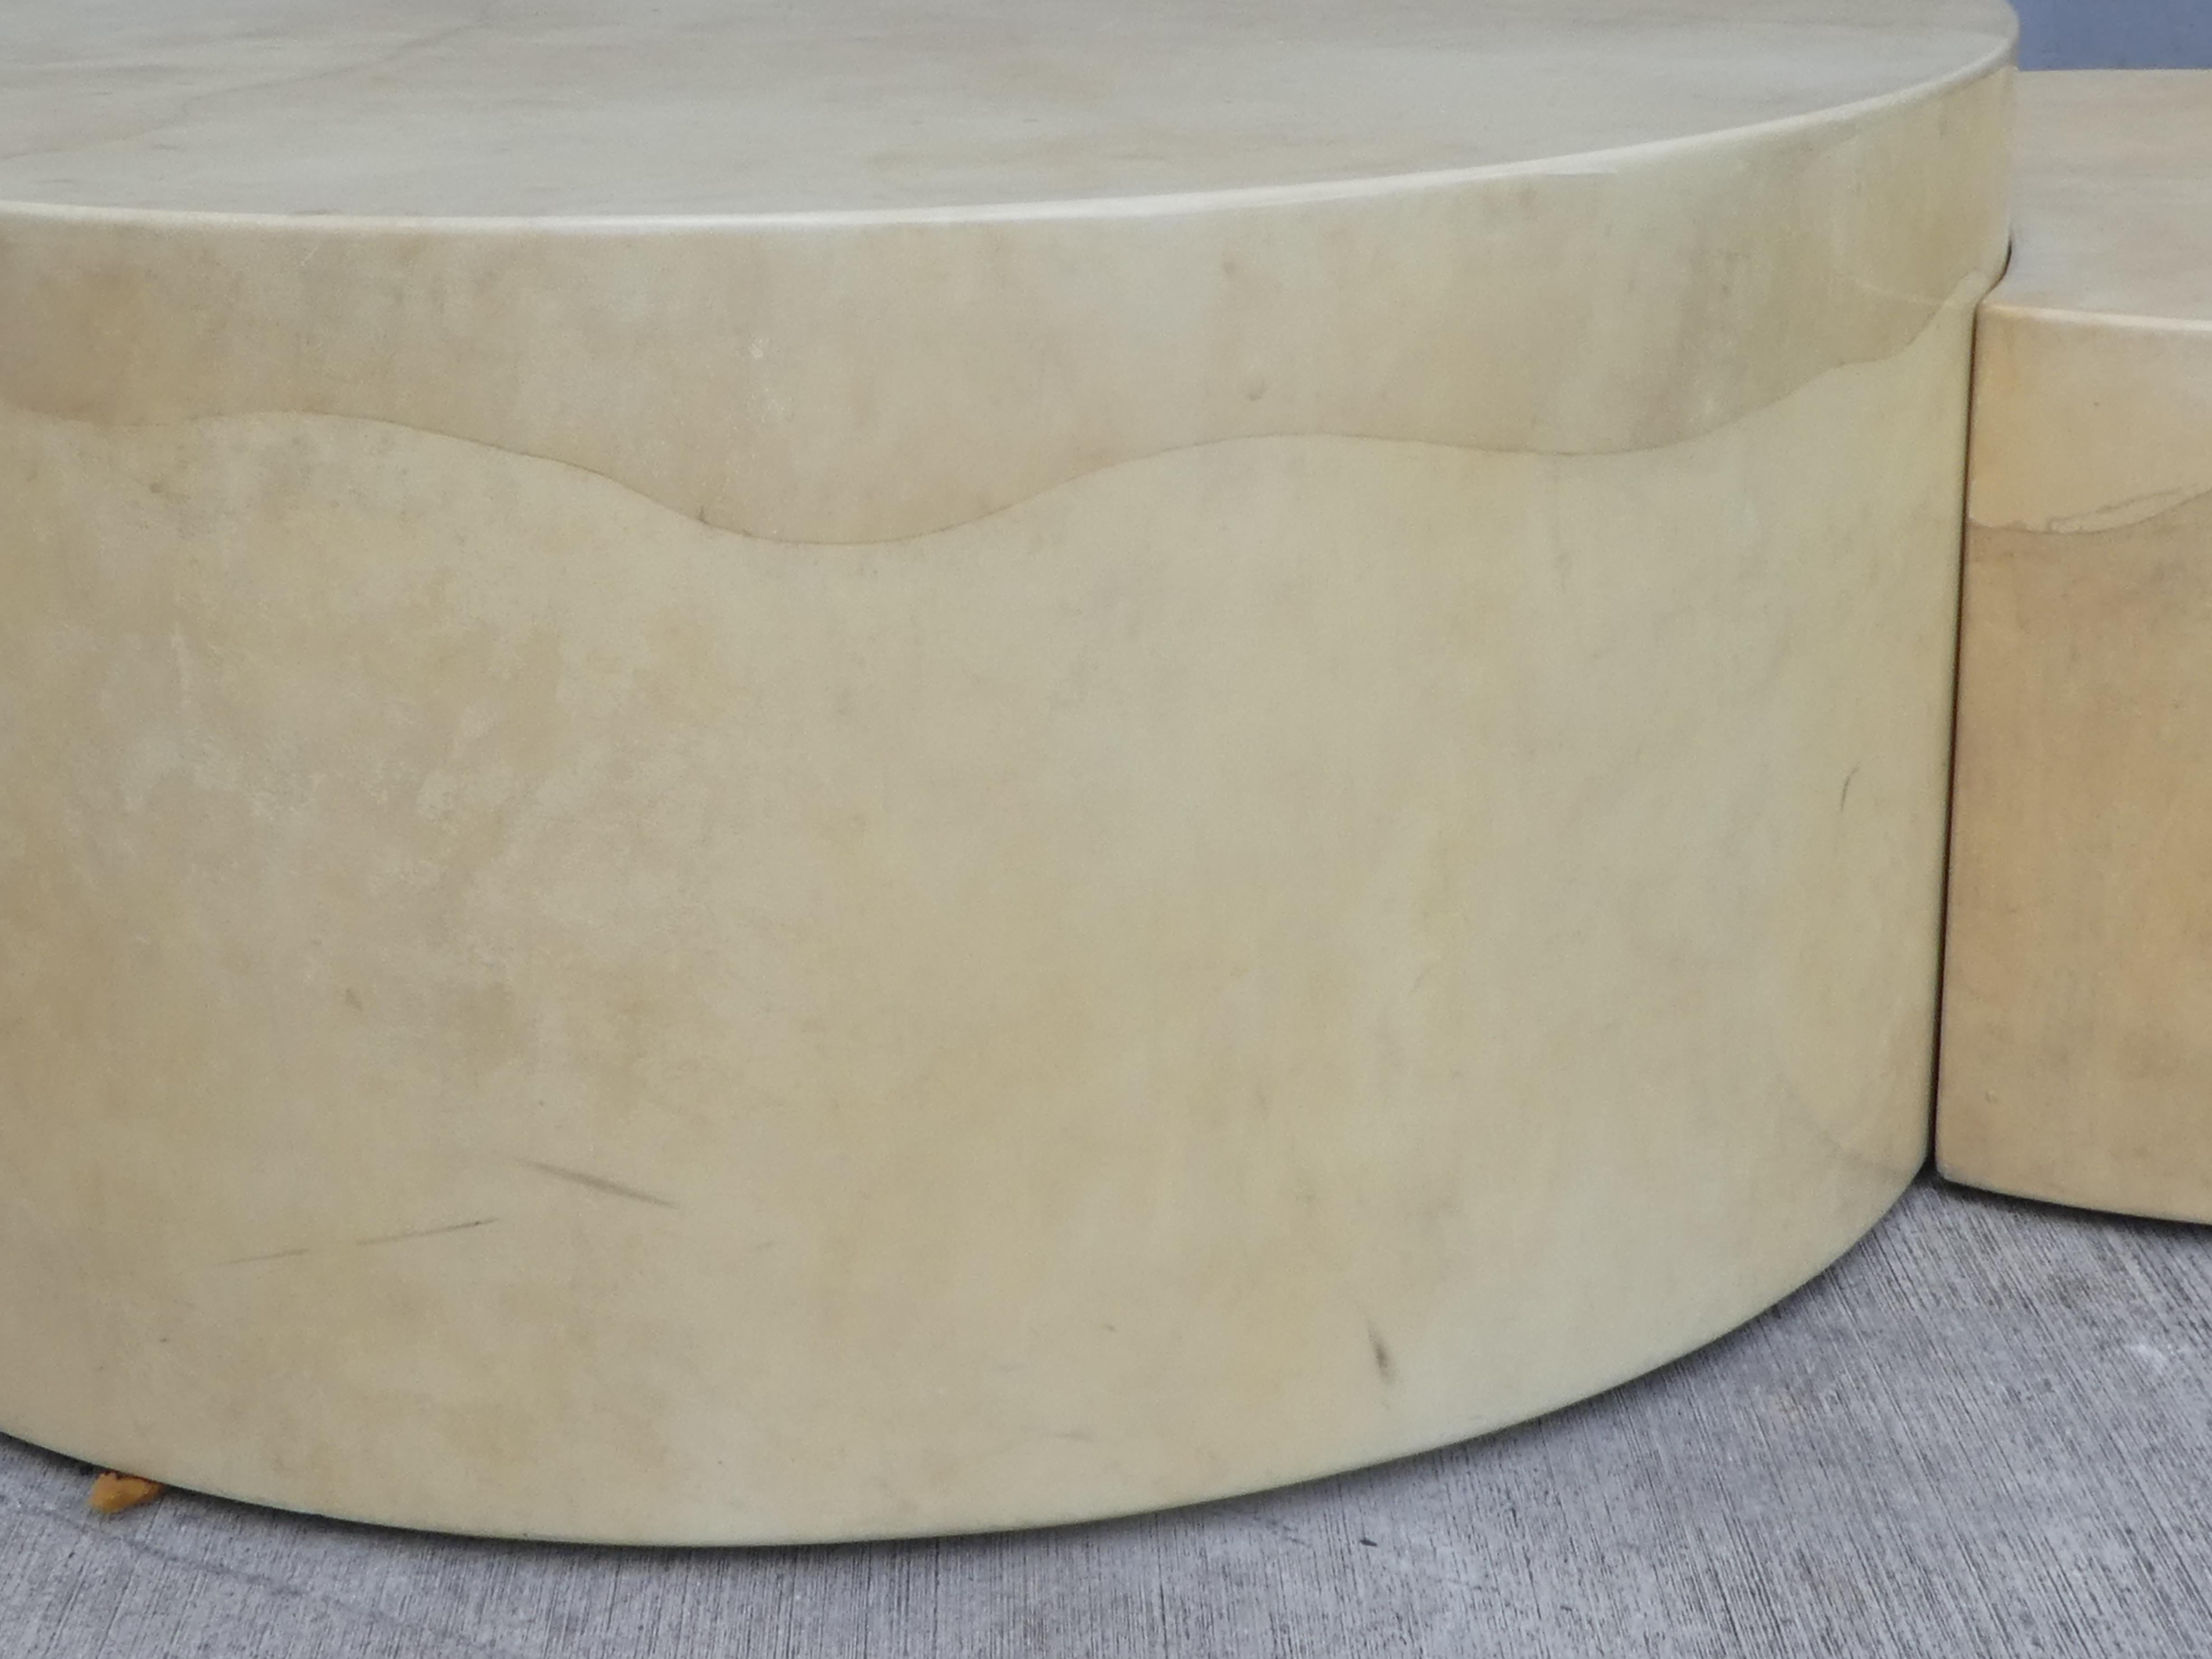 Unusual 3-part lacquered goatskin coffee table with two pull out seats. The two side pieces separate completely to provide seats or two separate tables.